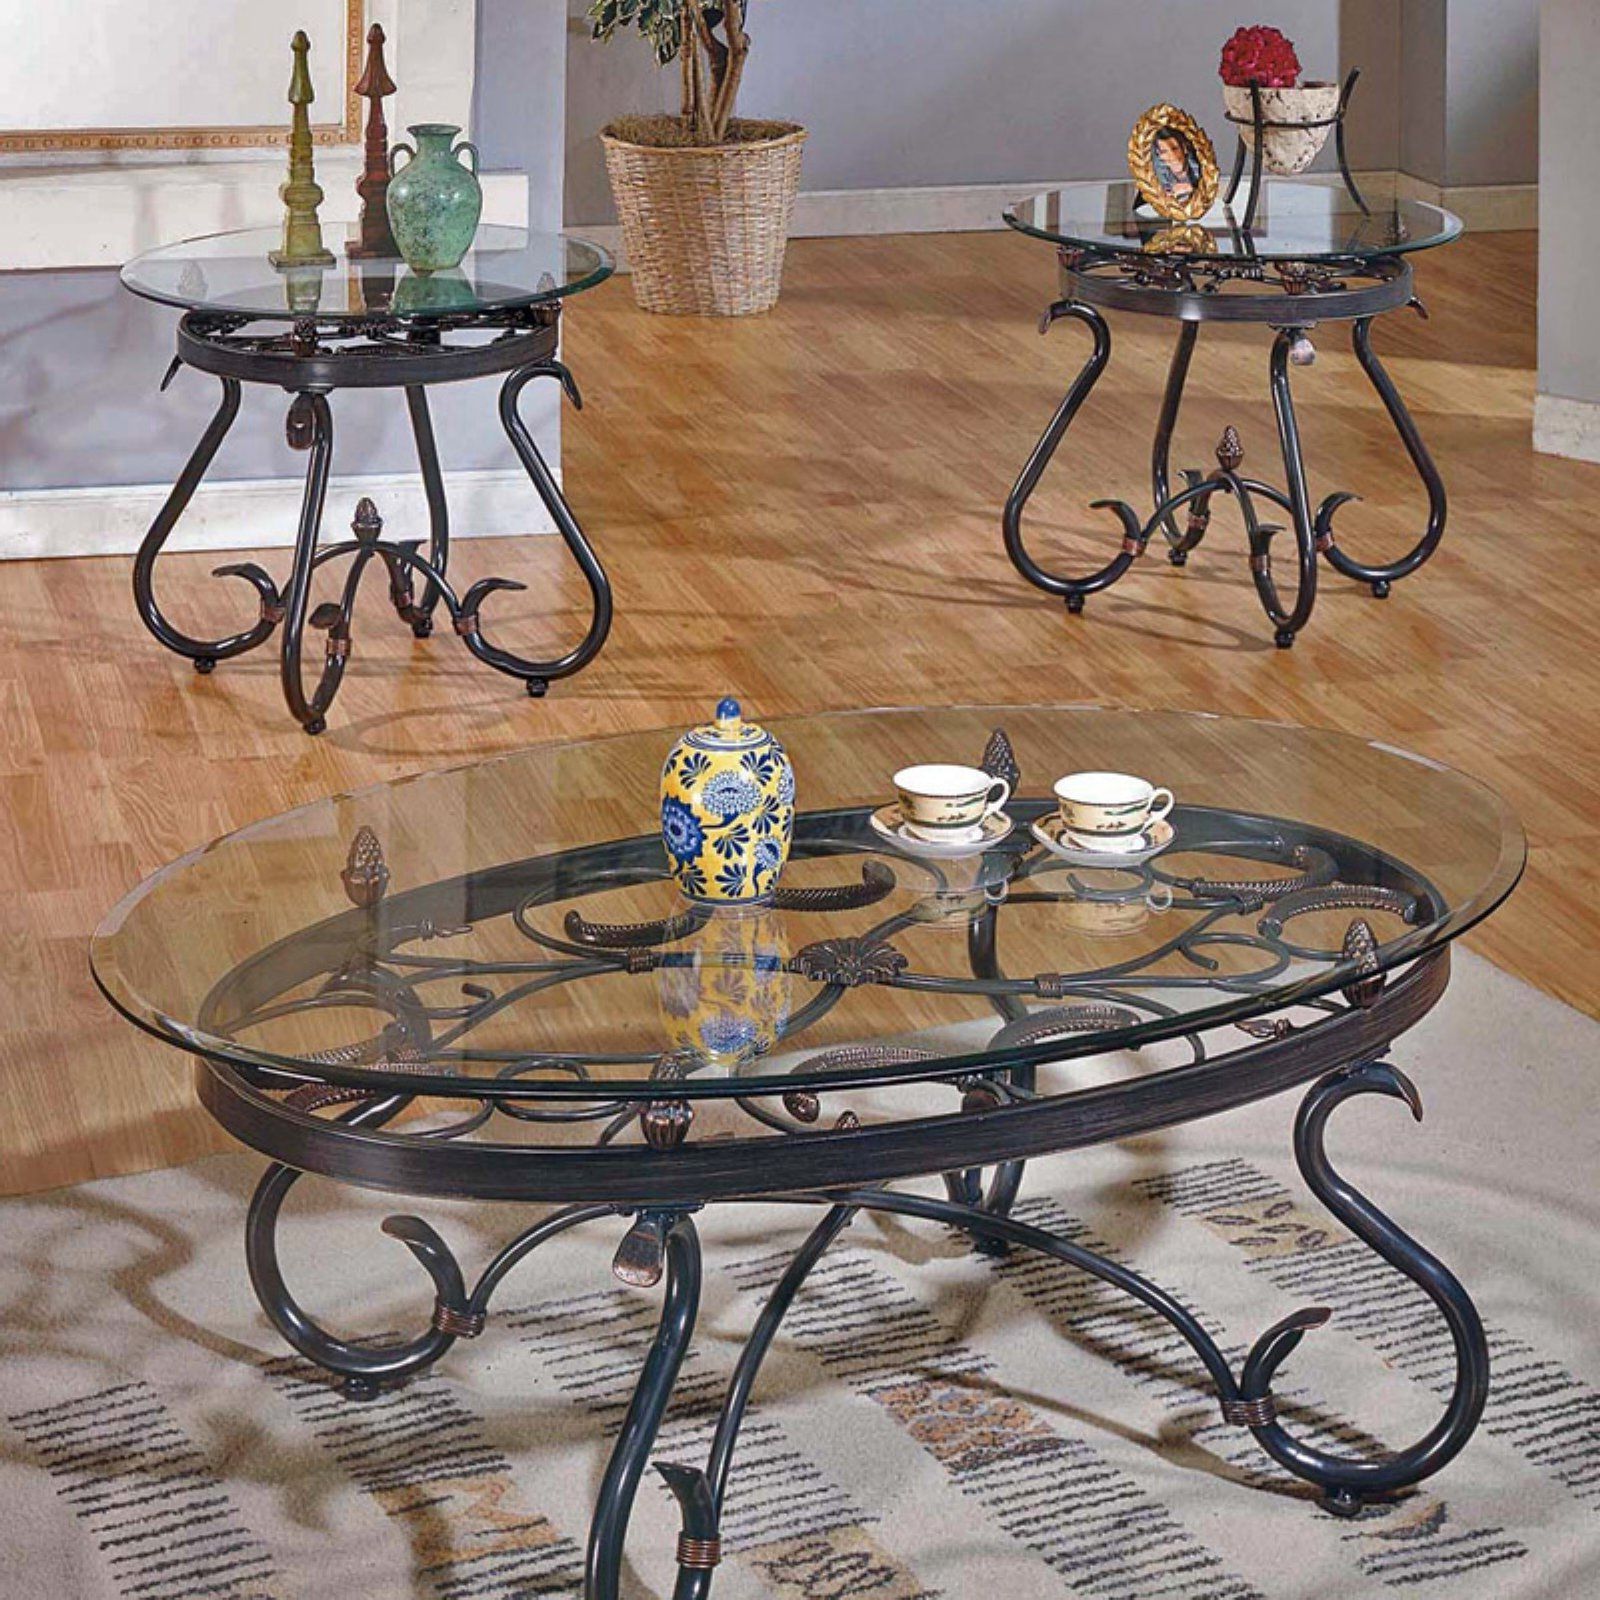 3 Piece Coffee Table Within Most Popular 3 Piece Coffee Tables (View 7 of 20)